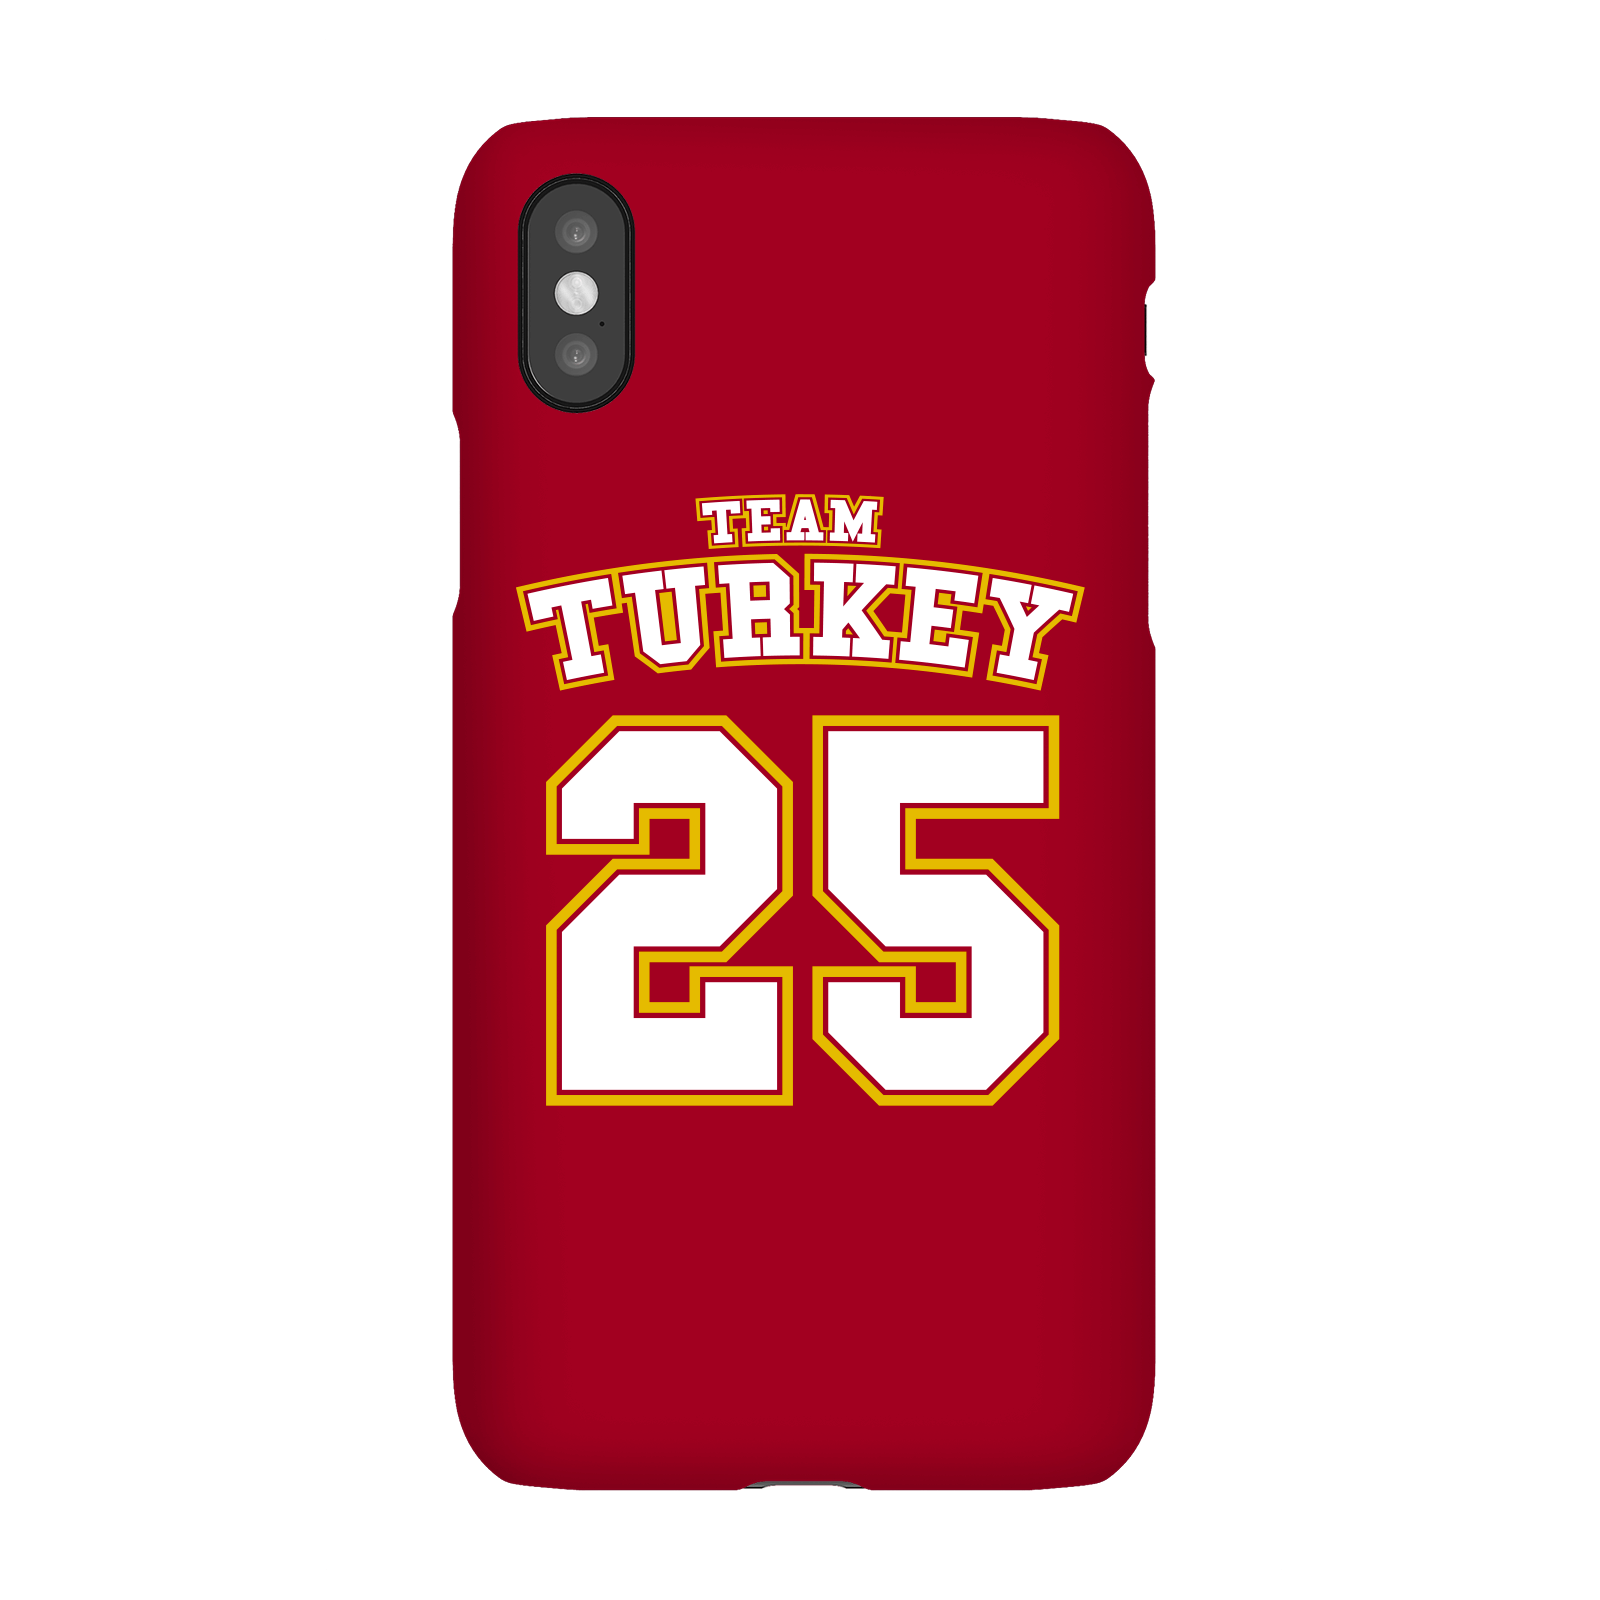 Team Turkey 25 Phone Case for iPhone and Android - iPhone 5/5s - Snap Case - Matte